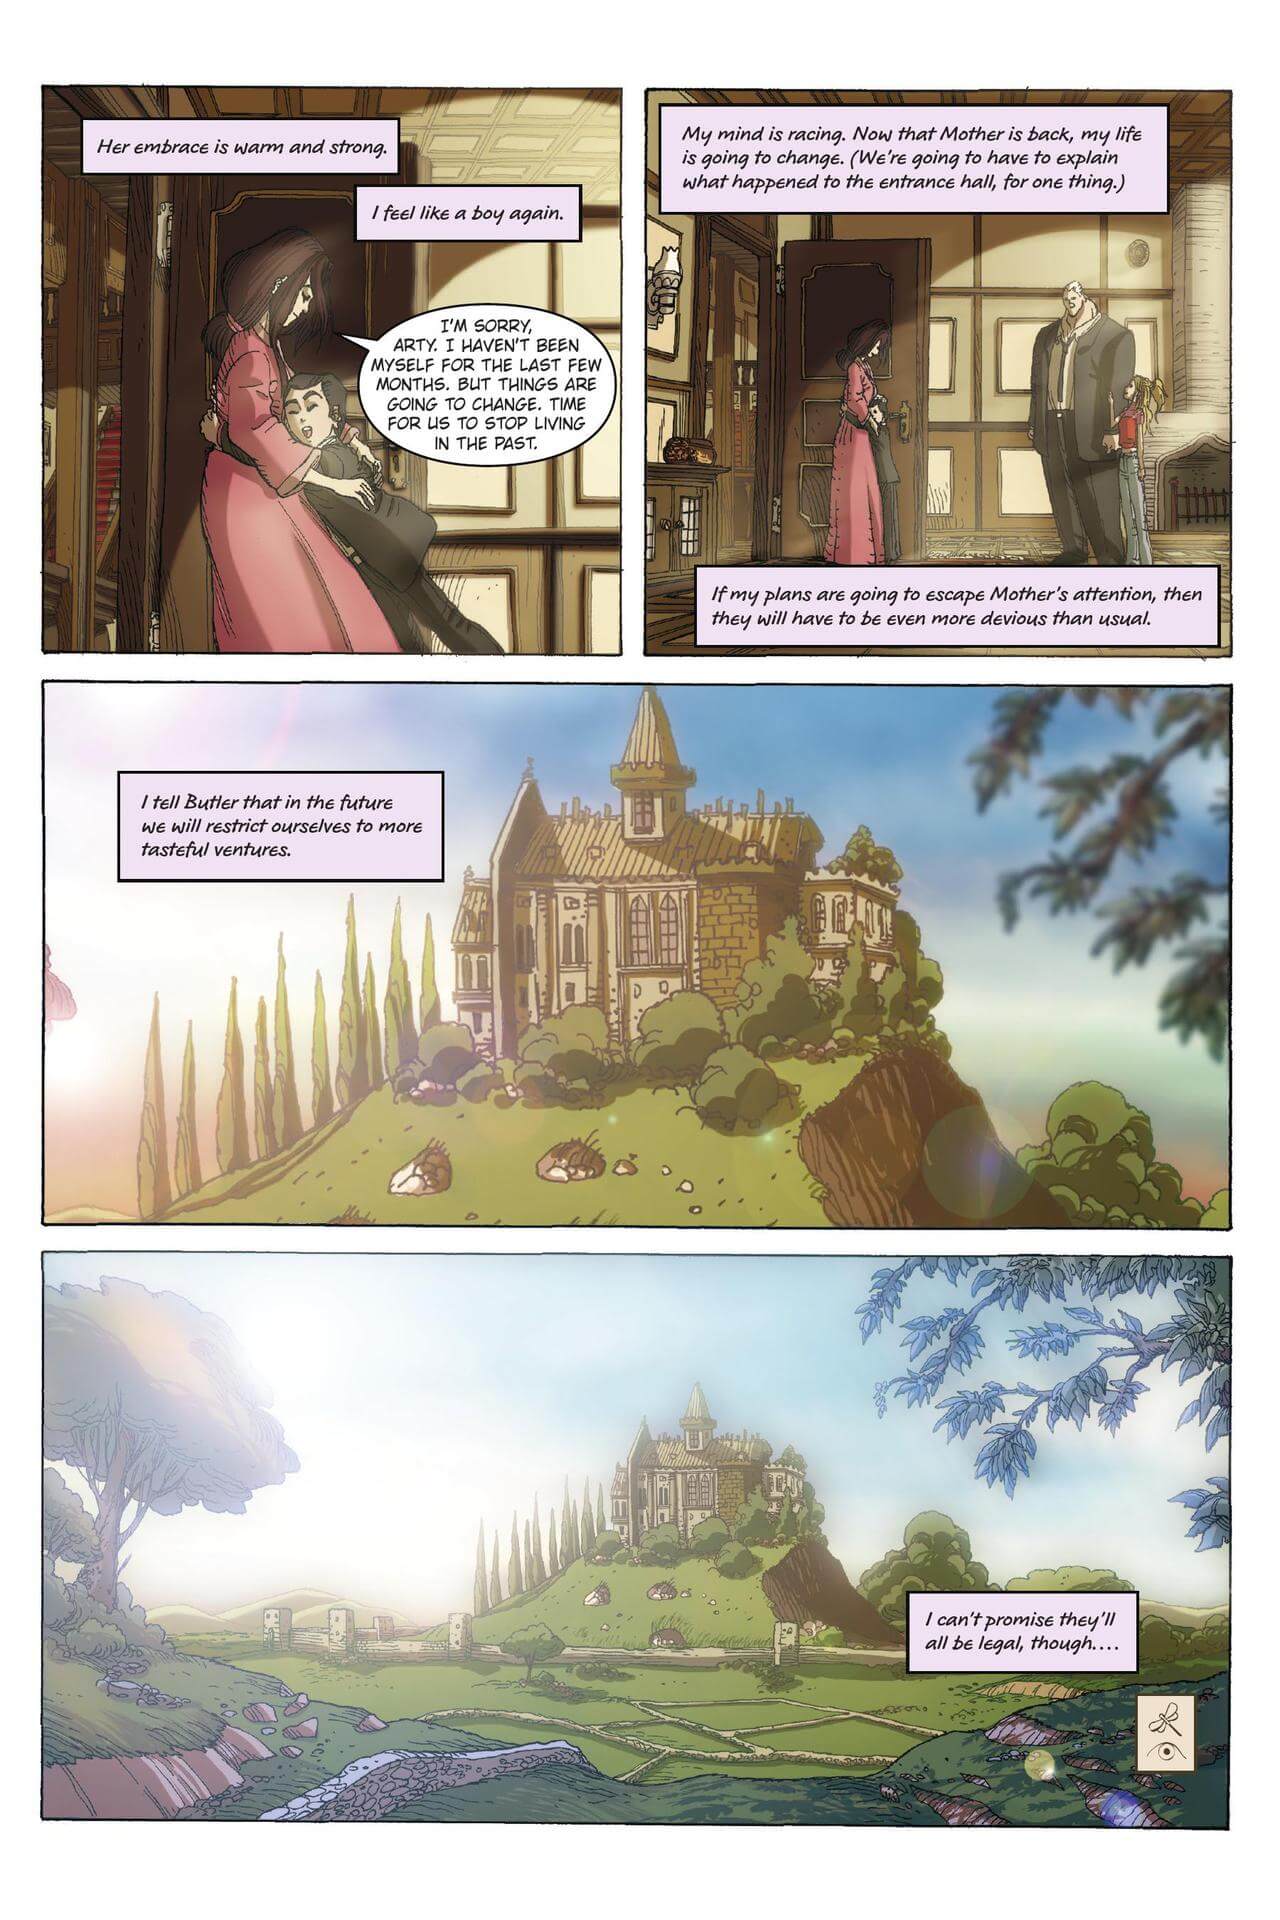 page 110 of artemis fowl the graphic novel